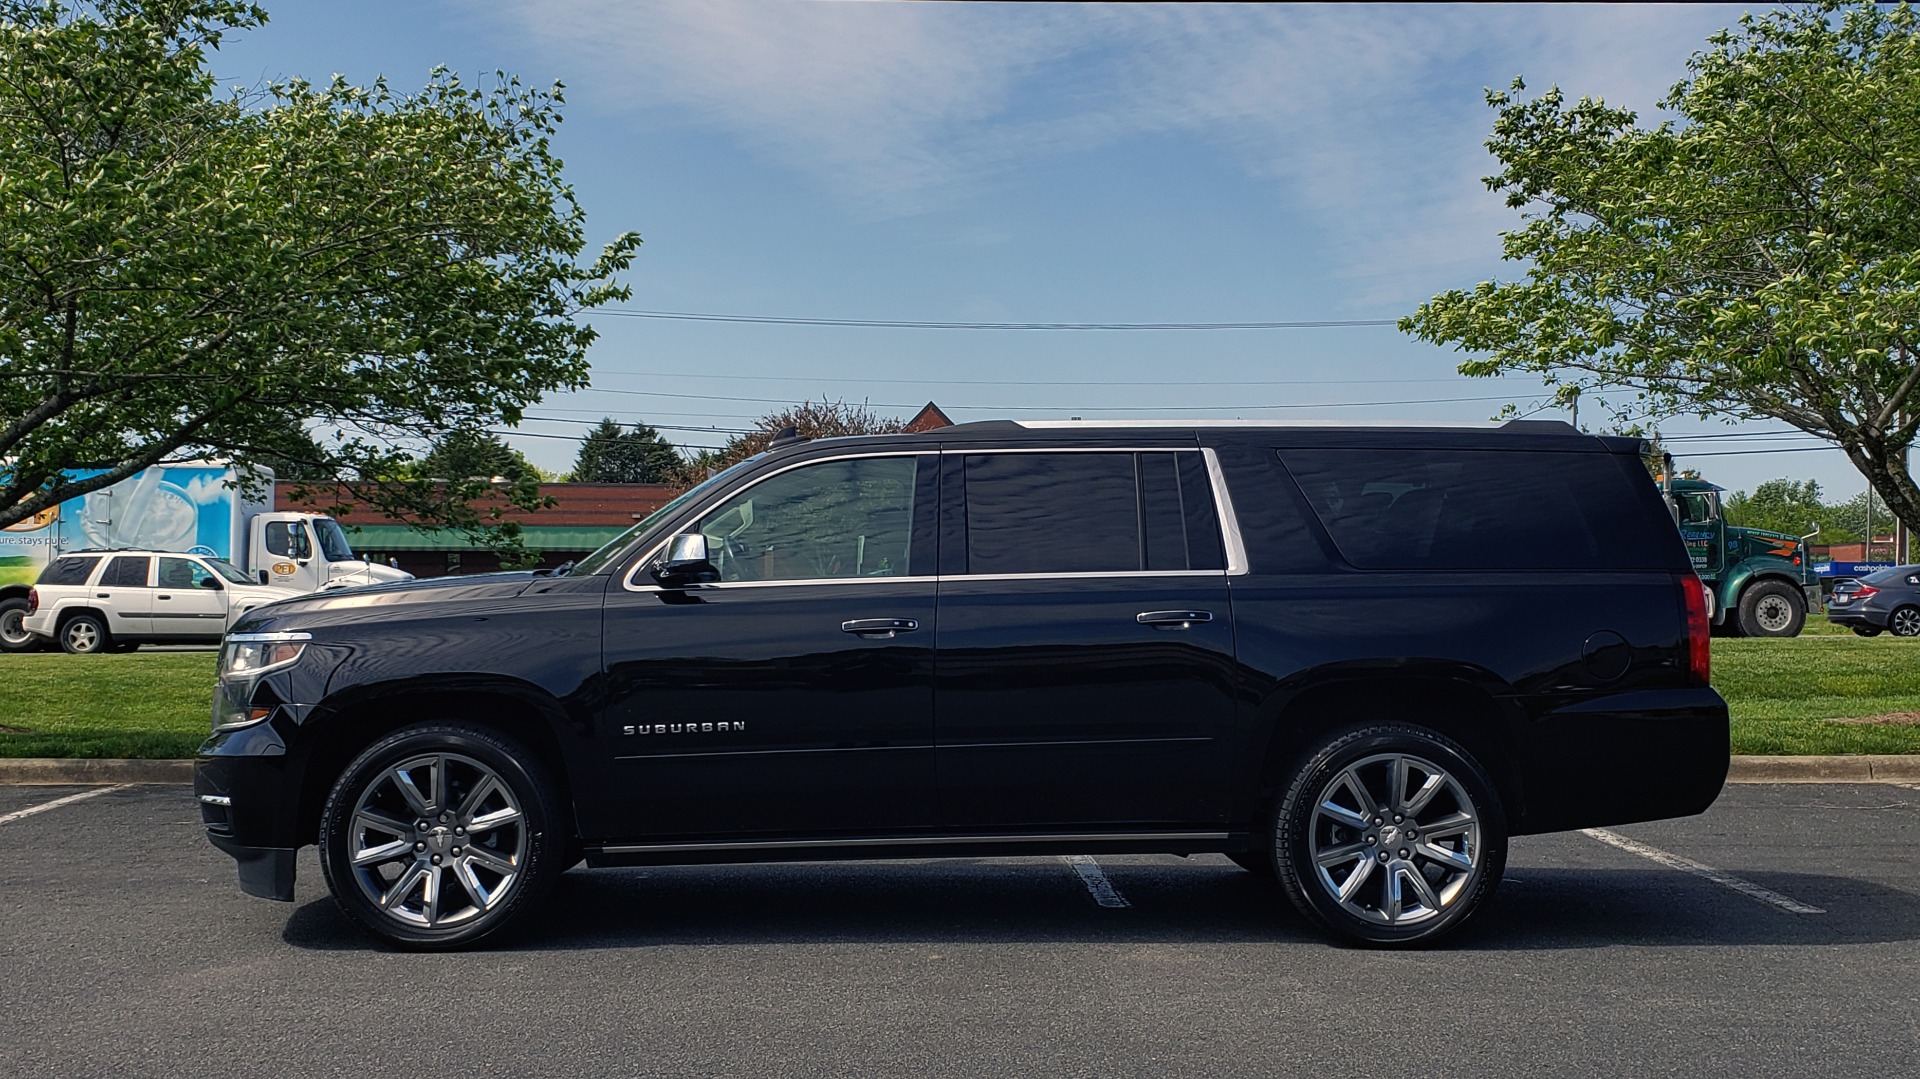 Used 2016 Chevrolet SUBURBAN LTZ 4WD / ENTERTAIN / TRAILER PKG / SNRF / NAV / CAMERA / 3-ROW for sale Sold at Formula Imports in Charlotte NC 28227 2